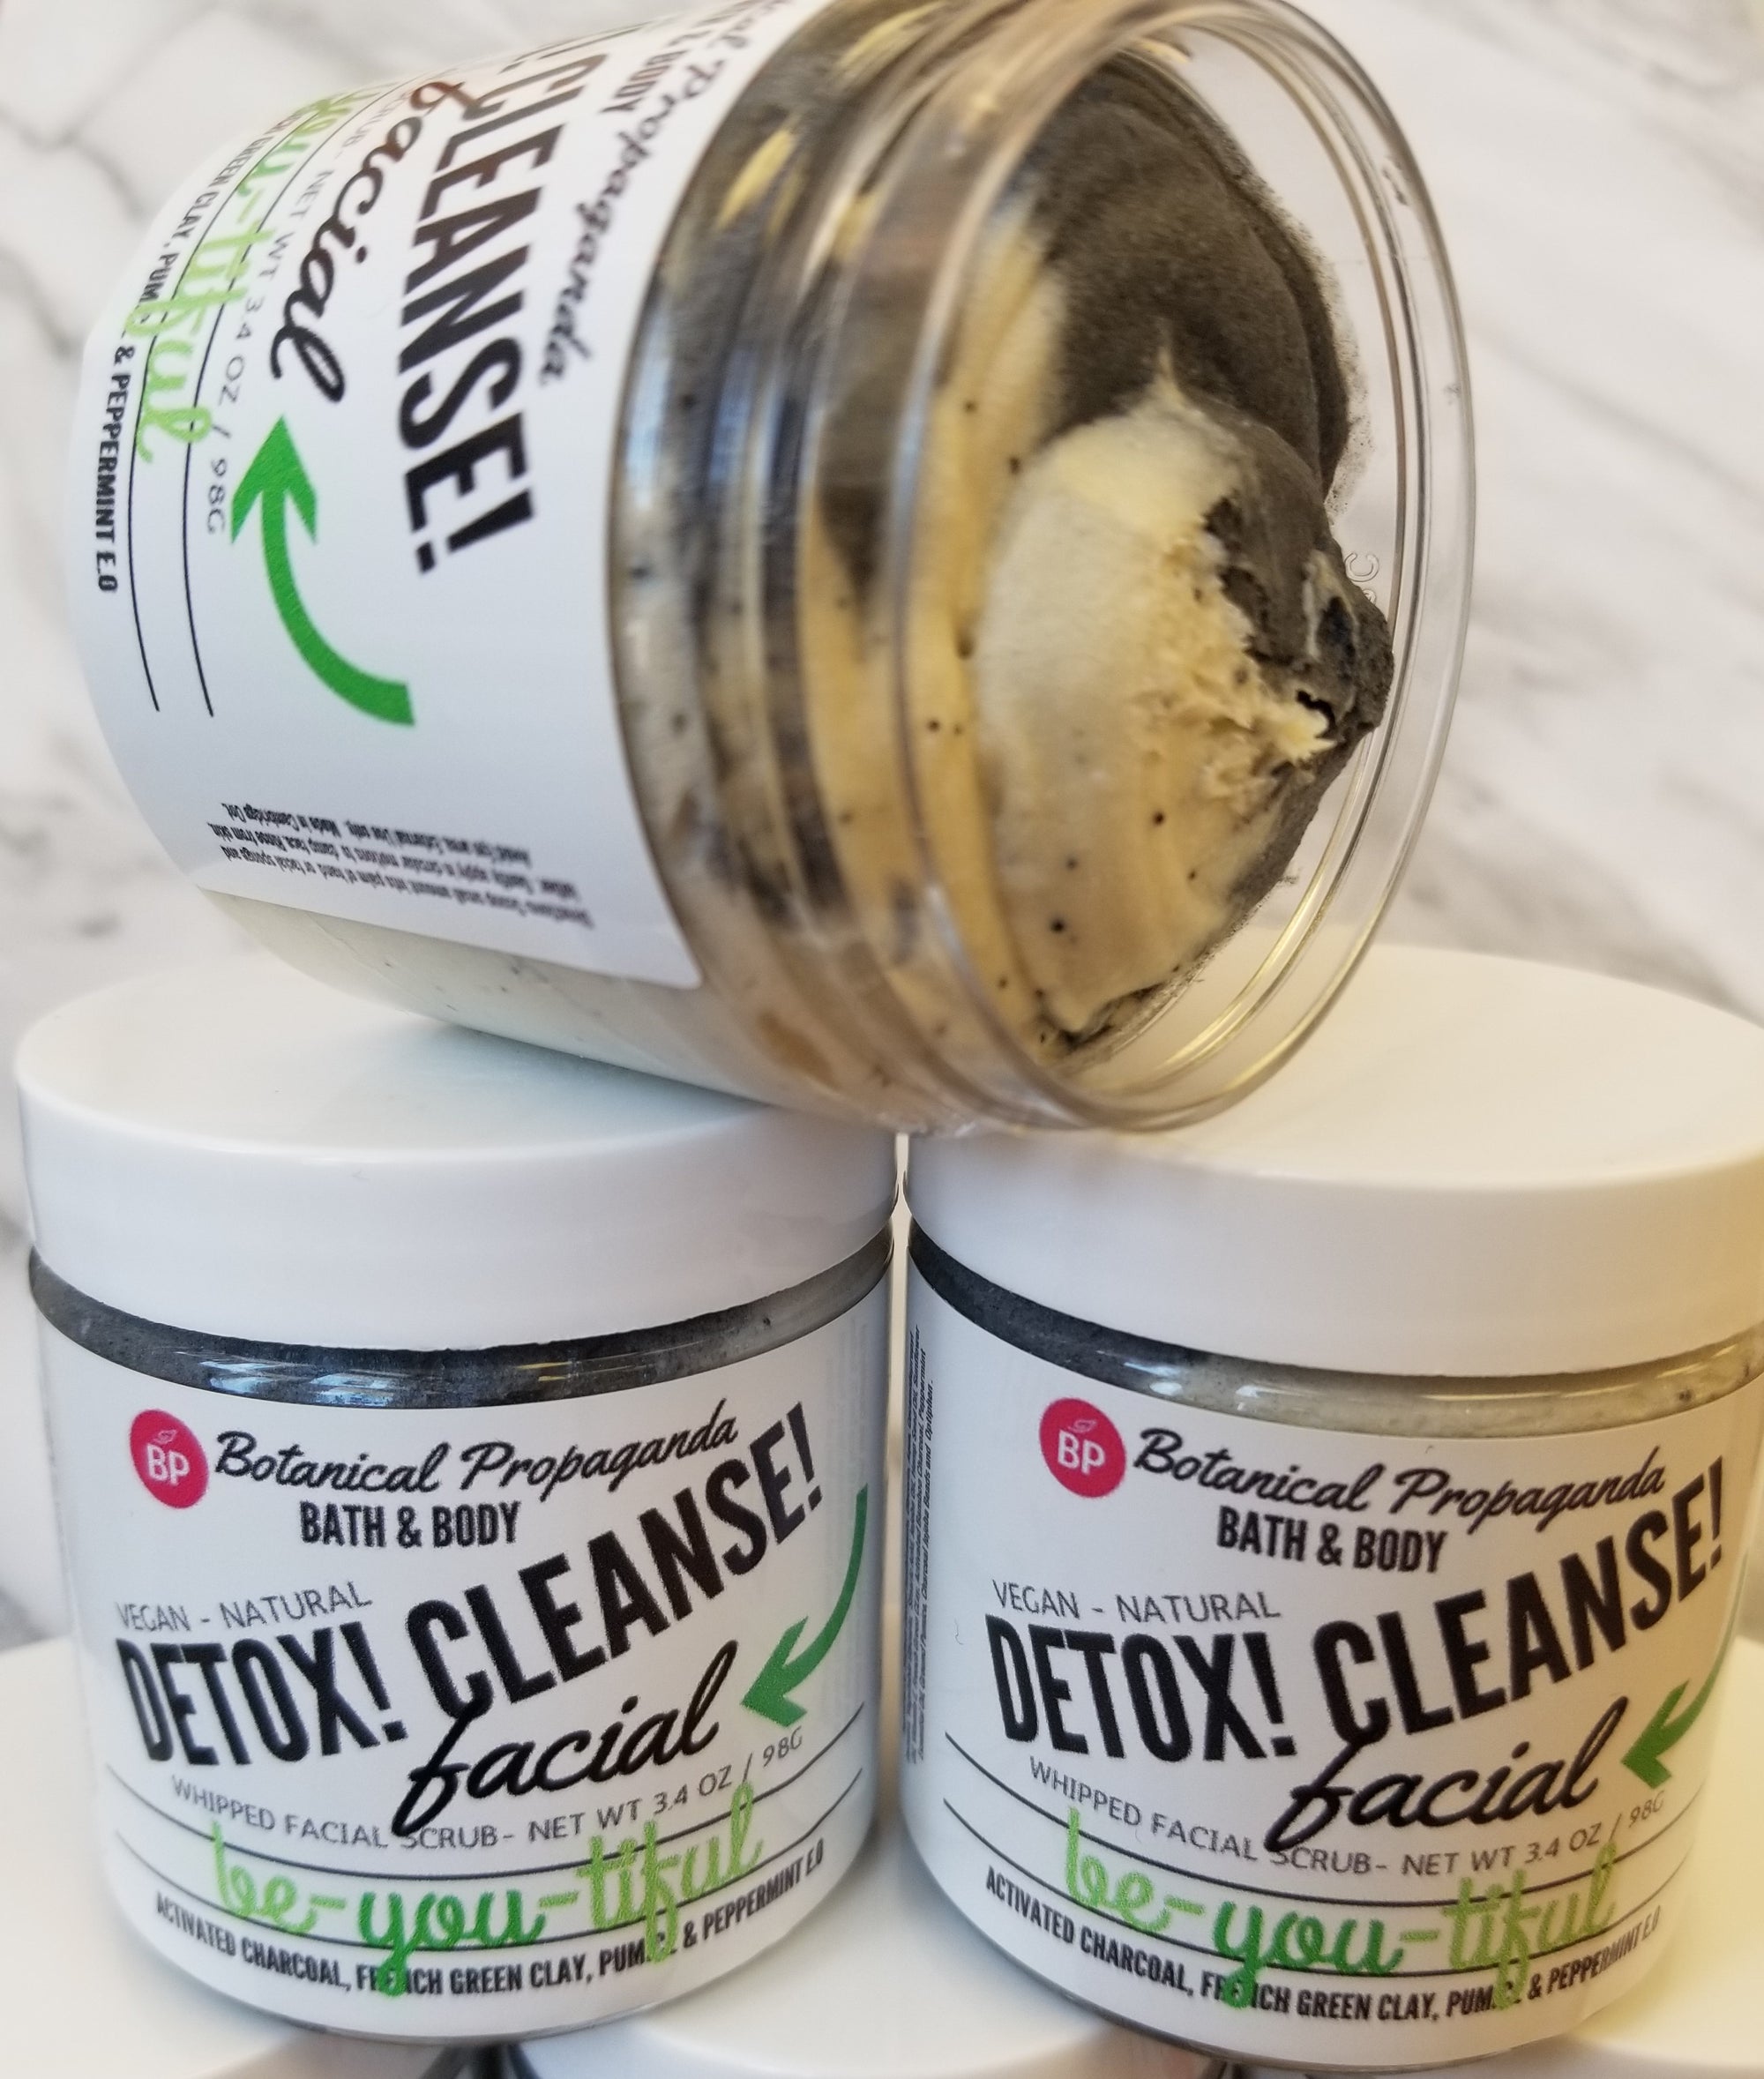 DETOX CLEANSE WHIPPED FACIAL SCRUB REVIEW By Alyssa Amber Bath & Beauty